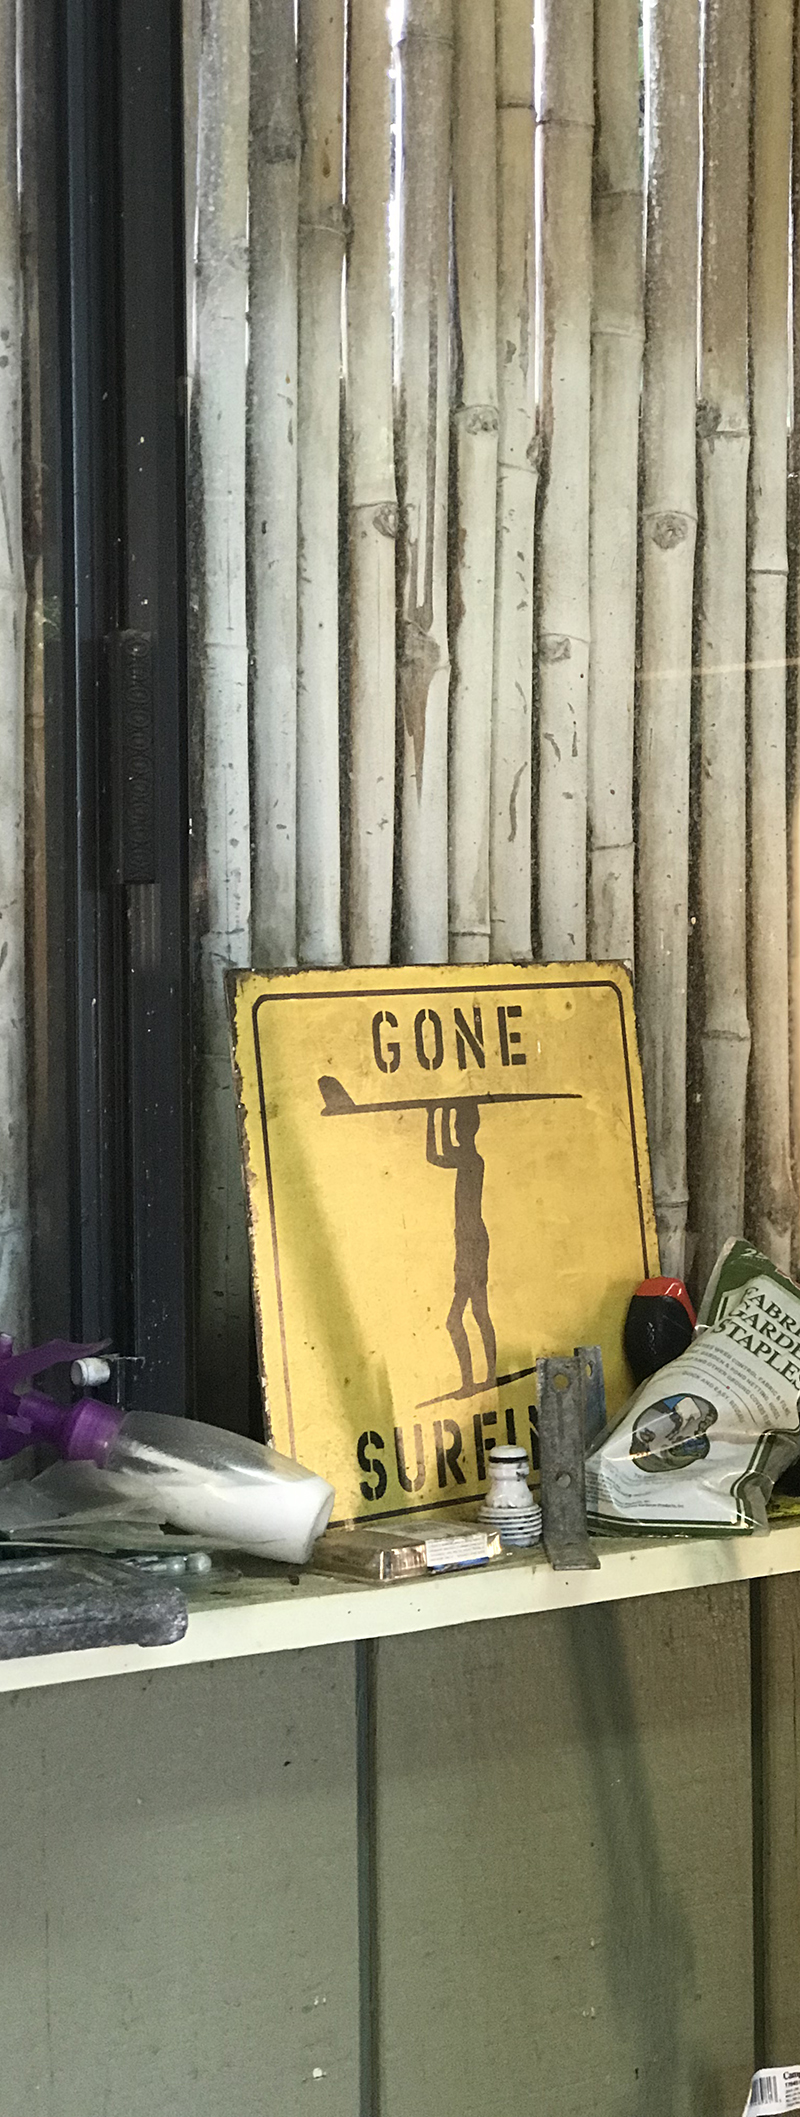 Gone Surfing sign with bamboo wall